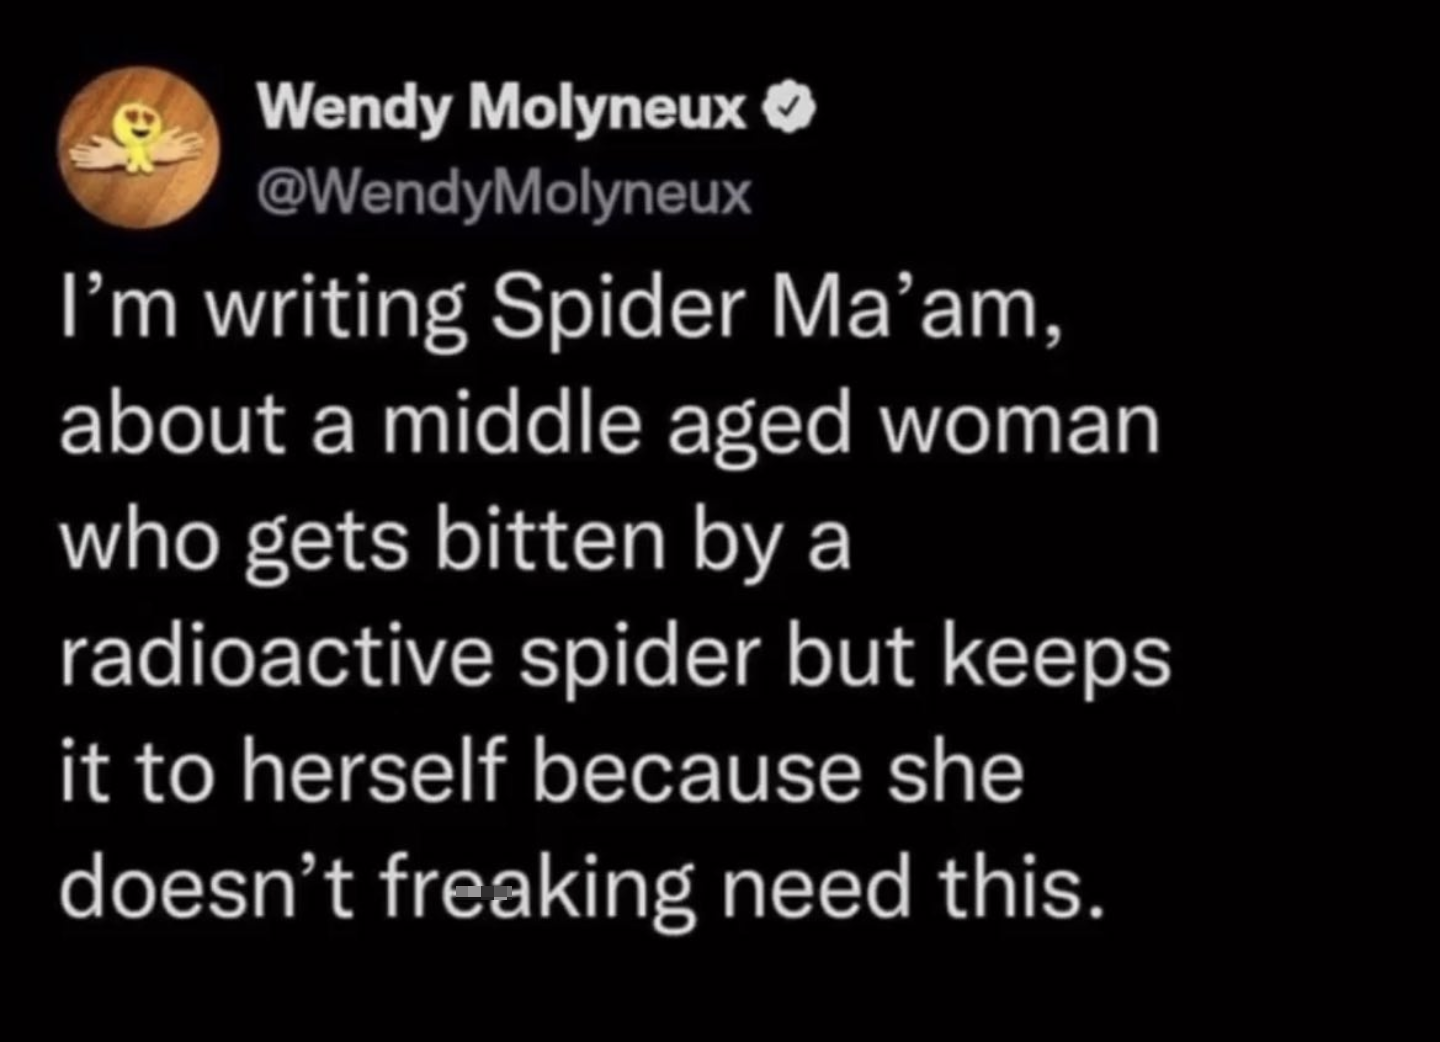 savage tweets of the week - peter schmidt wisconsin video - Wendy Molyneux I'm writing Spider Ma'am, about a middle aged woman who gets bitten by a radioactive spider but keeps it to herself because she doesn't freaking need this.